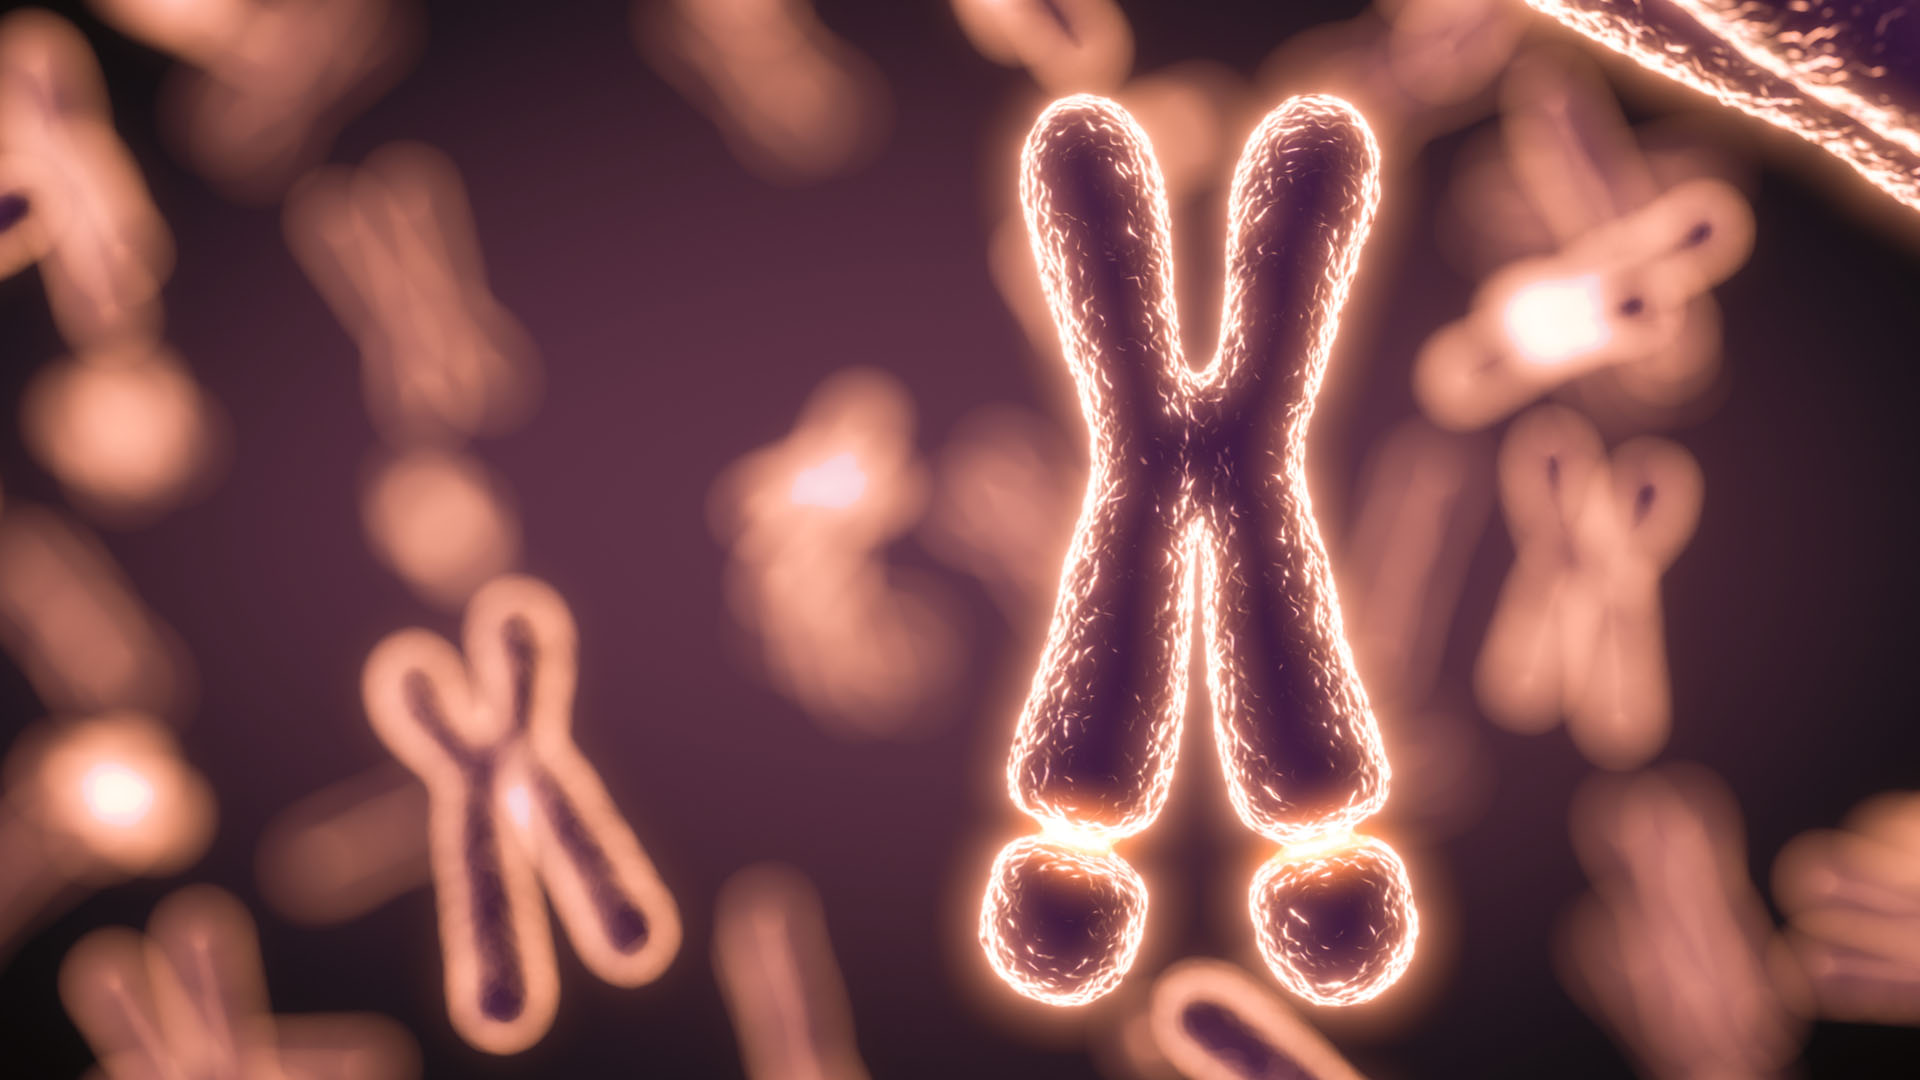 New Insights into Fragile X Syndrome and Autism